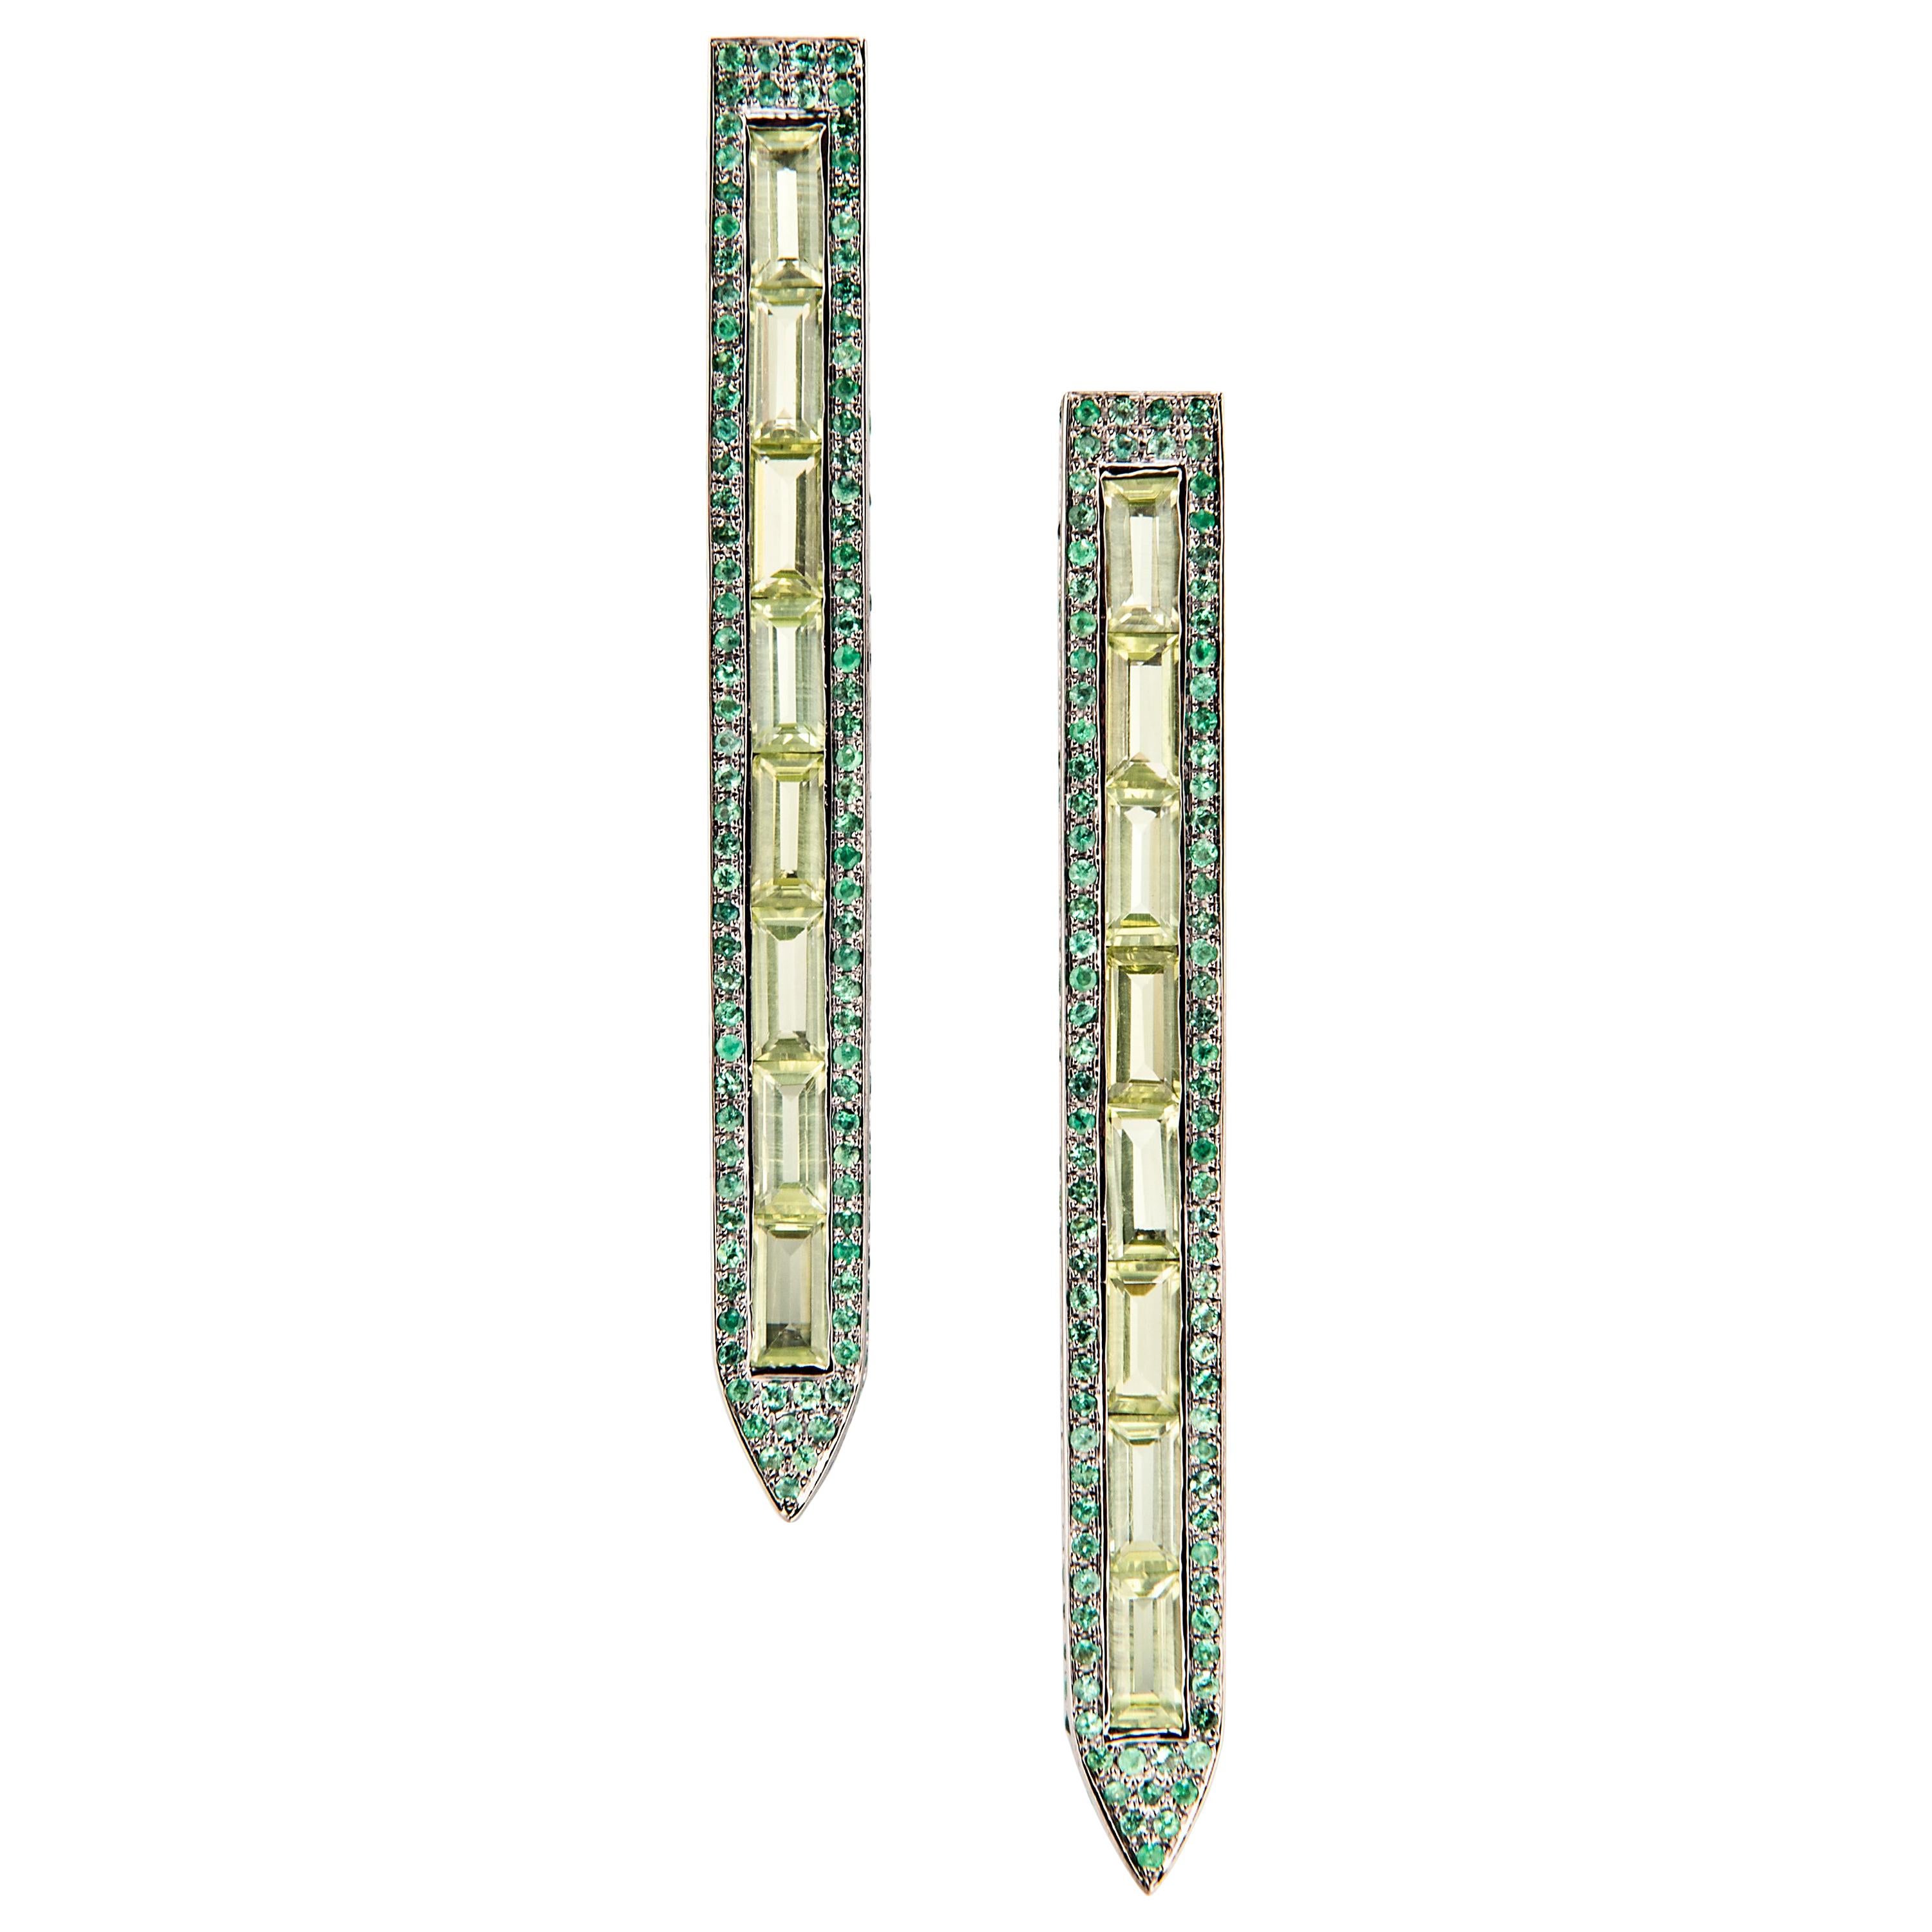 Inspired by stained glass cathedral windows, these elongated and vibrantly colored earrings are an elegant addition to any jewelry wardrobe.

18K White Gold
Emerald TCW is 2.25
Peridots
Friction post and back closure
Length is 2.25 inches and width